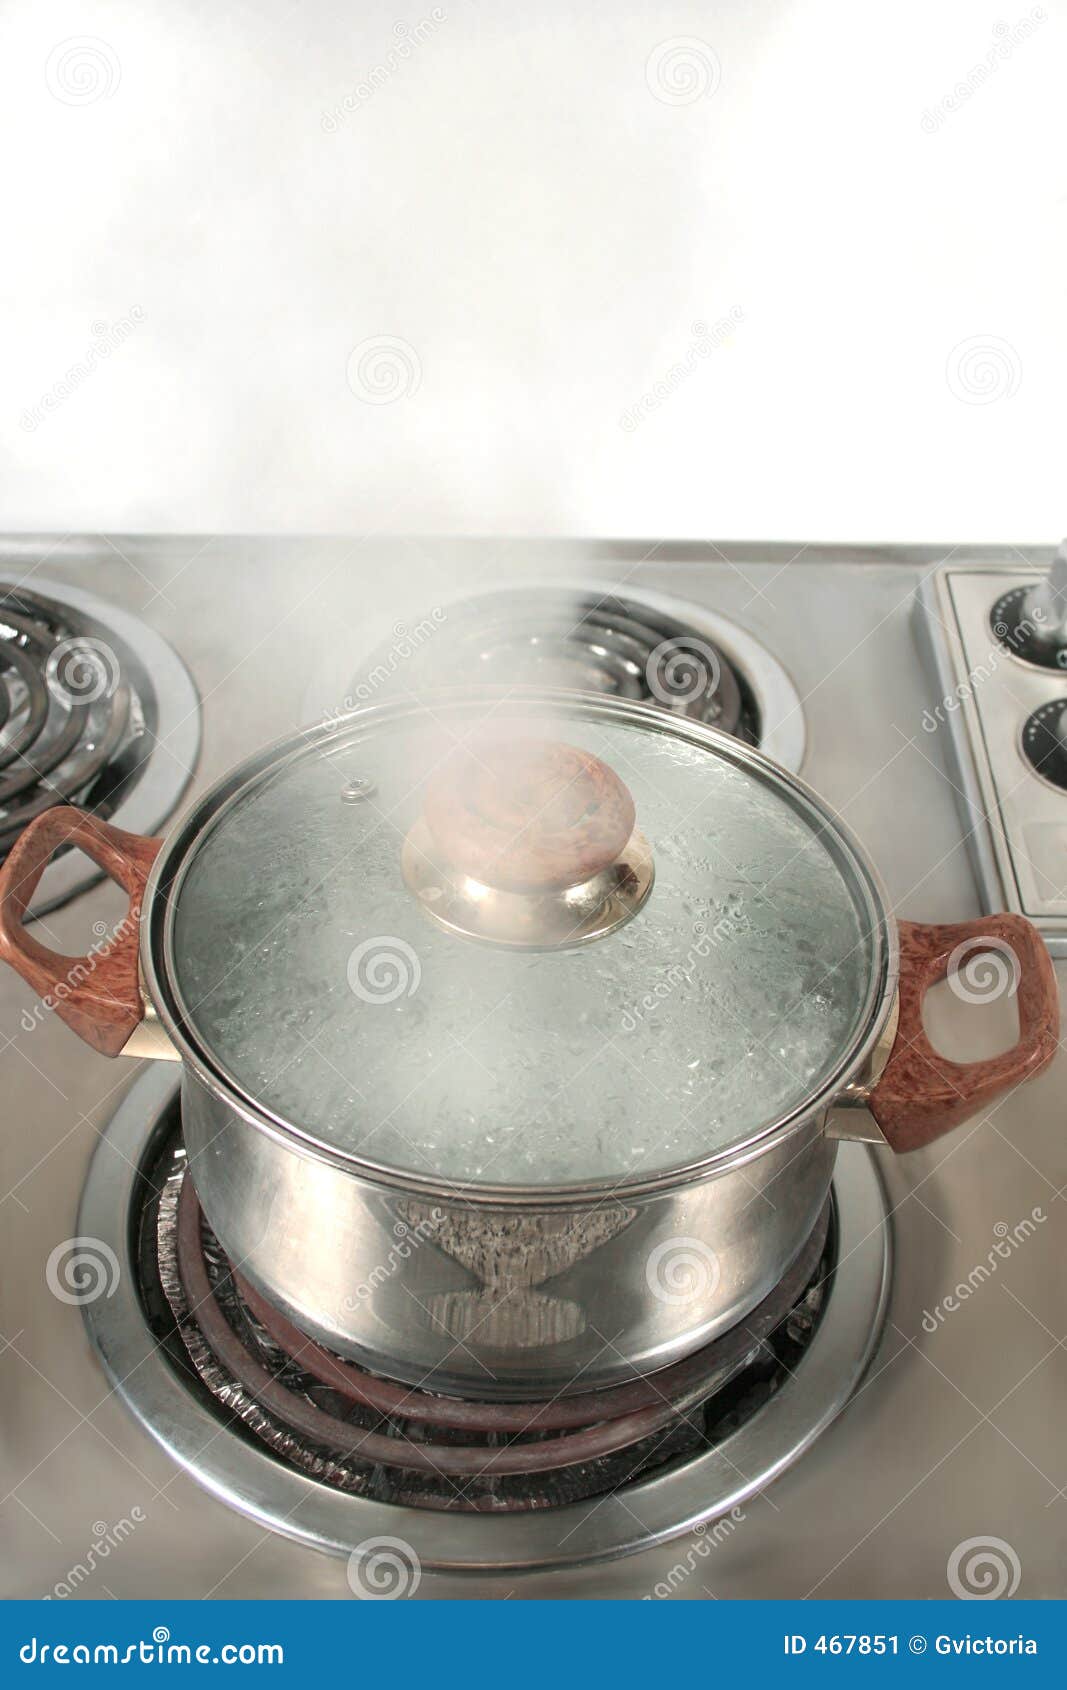 Steam Over Cooking Pot Stock Photo, Picture and Royalty Free Image. Image  49926914.